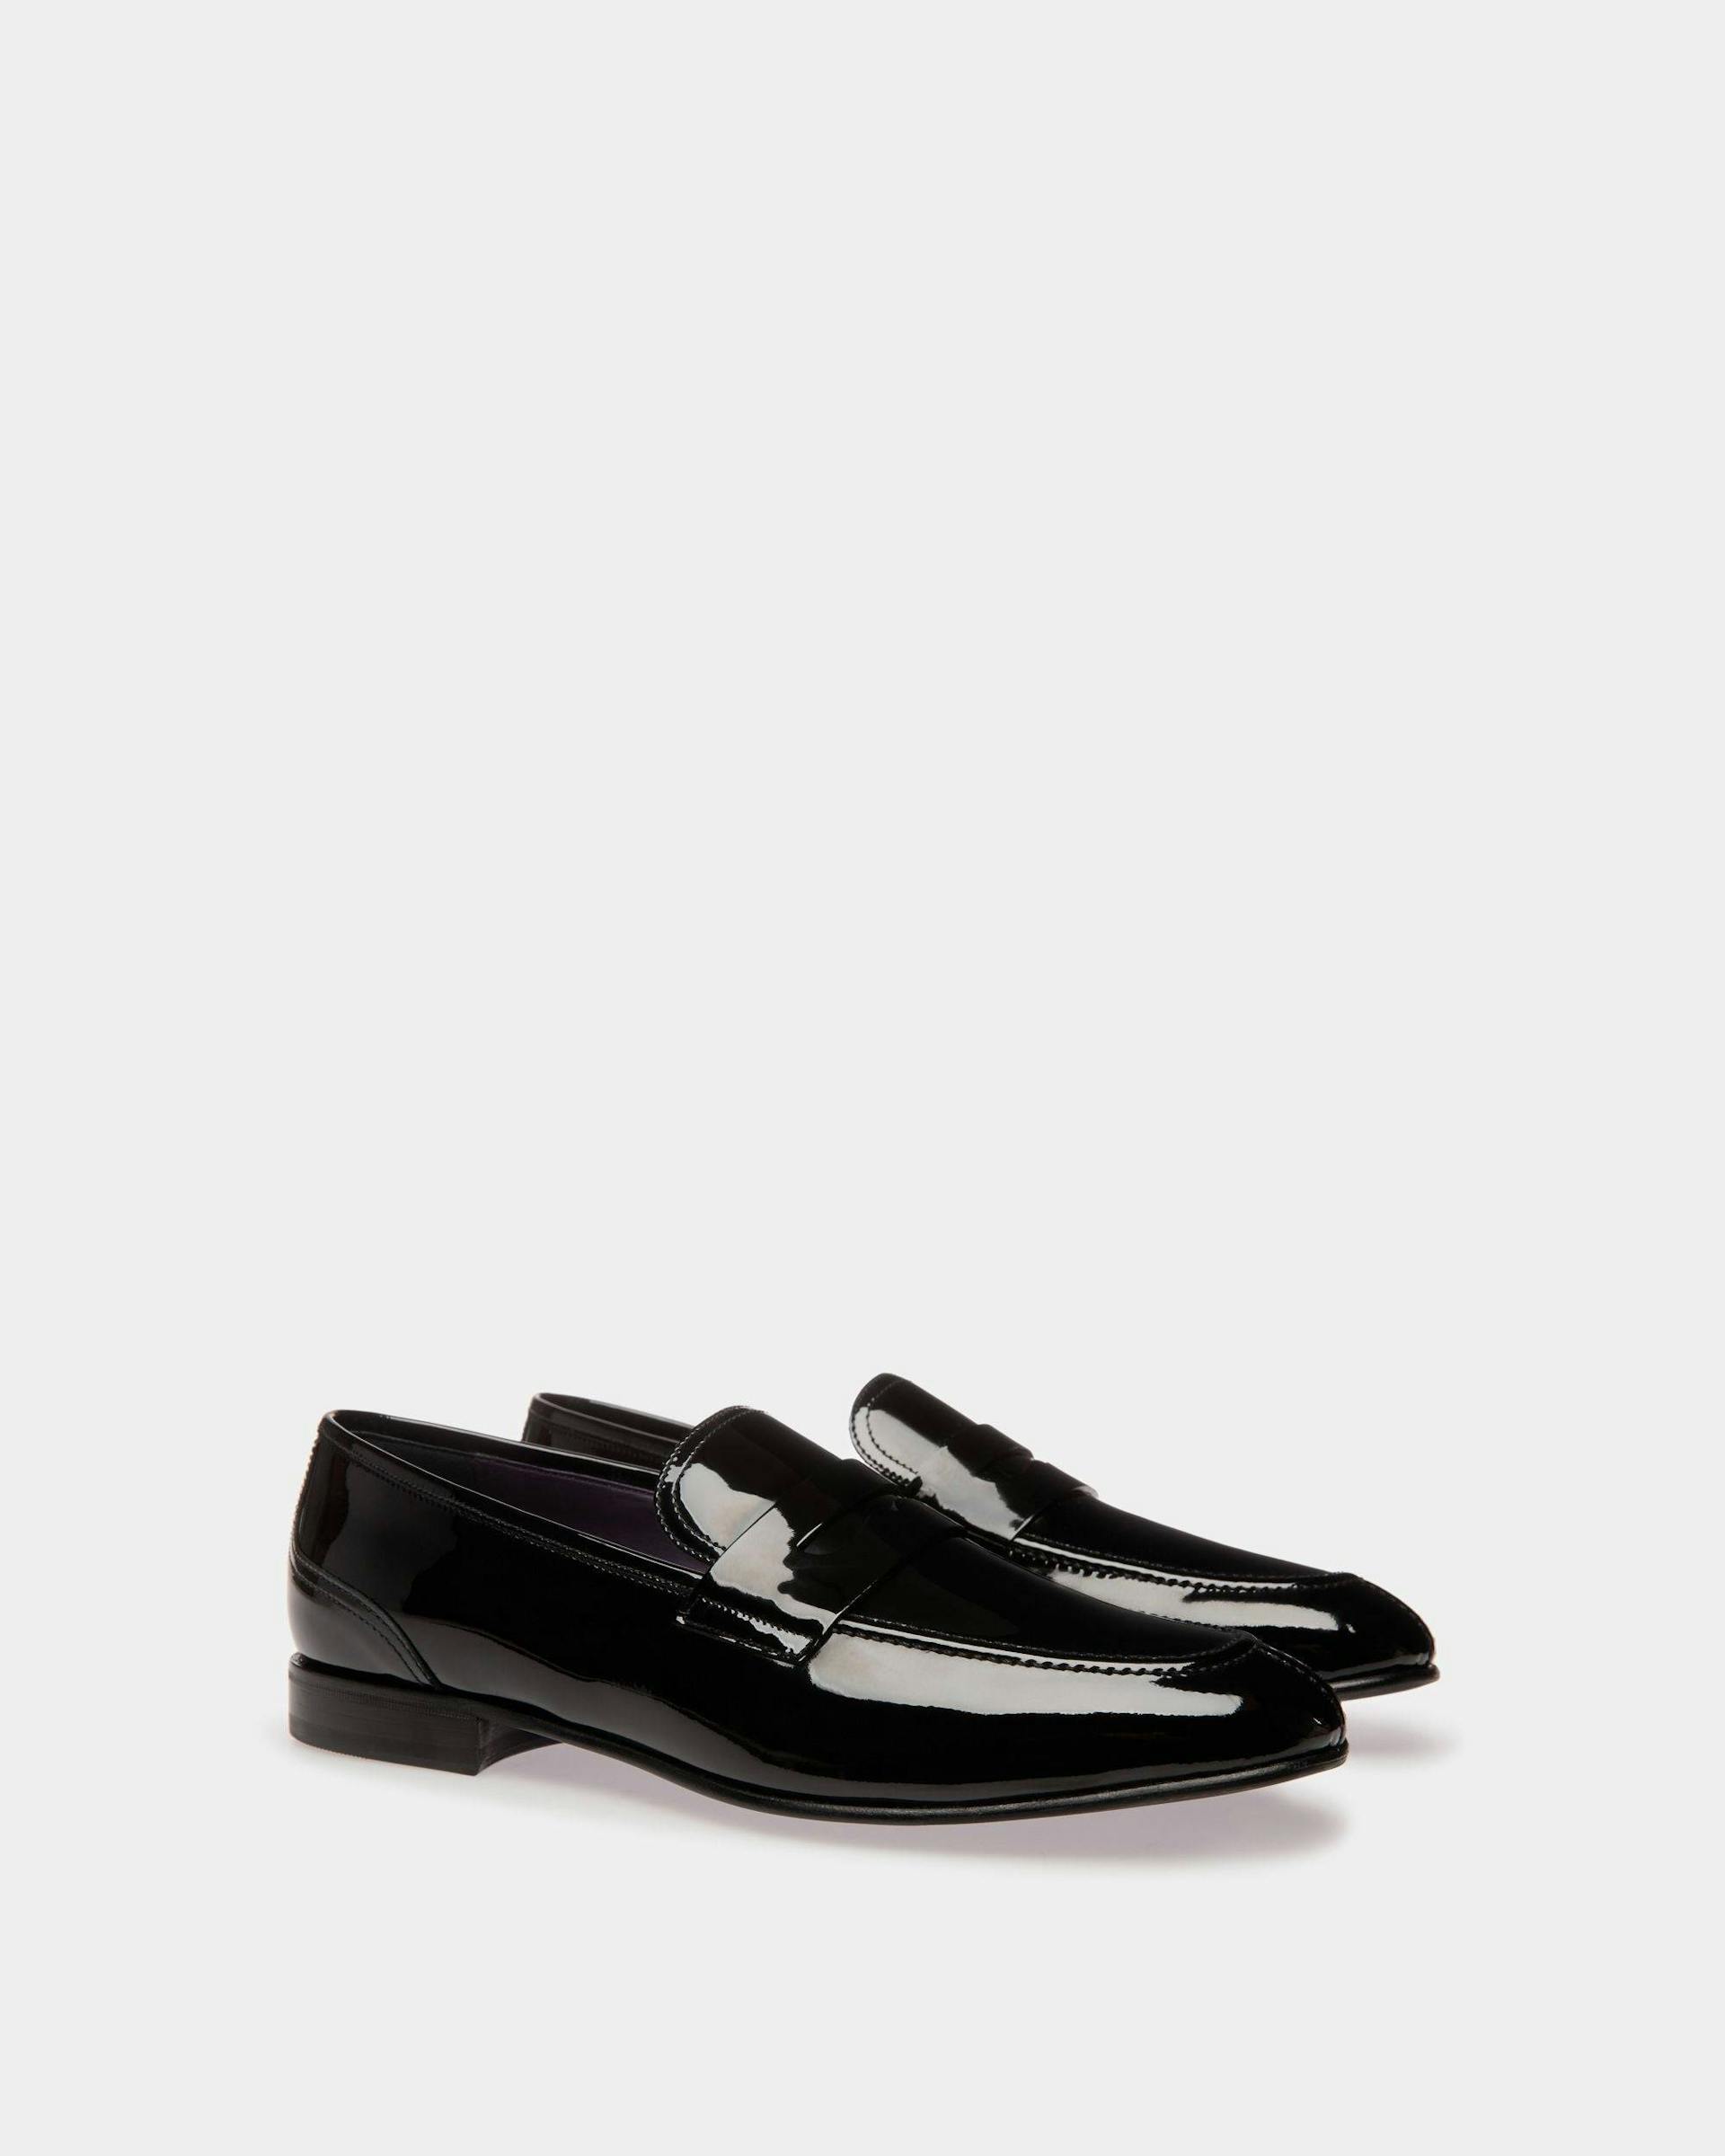 Men's Suisse Loafer in Black Patent Leather | Bally | Still Life 3/4 Front